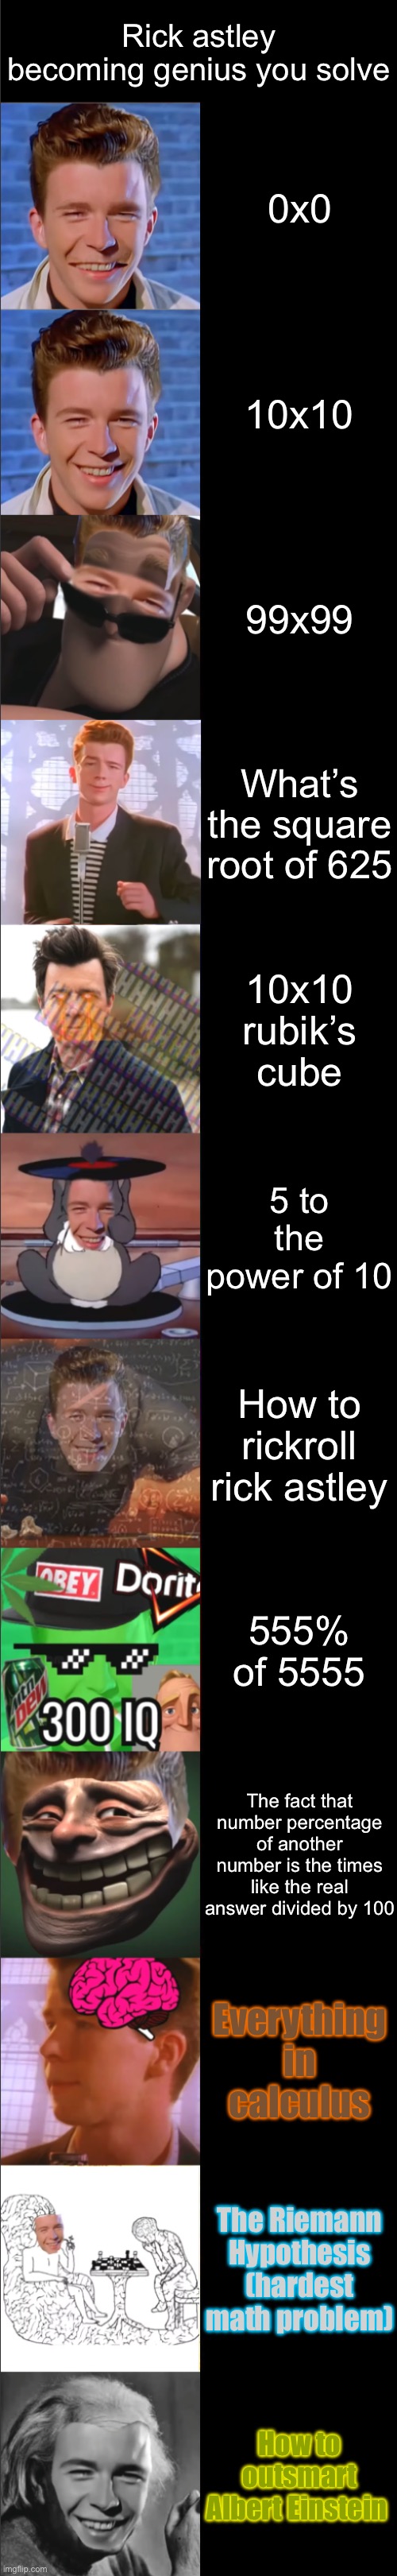 Rick astley becoming genius (you solve) | Rick astley becoming genius you solve; 0x0; 10x10; 99x99; What’s the square root of 625; 10x10 rubik’s cube; 5 to the power of 10; How to rickroll rick astley; 555% of 5555; The fact that number percentage of another number is the times like the real answer divided by 100; Everything in calculus; The Riemann Hypothesis (hardest math problem); How to outsmart Albert Einstein | image tagged in rick astley becoming genius | made w/ Imgflip meme maker